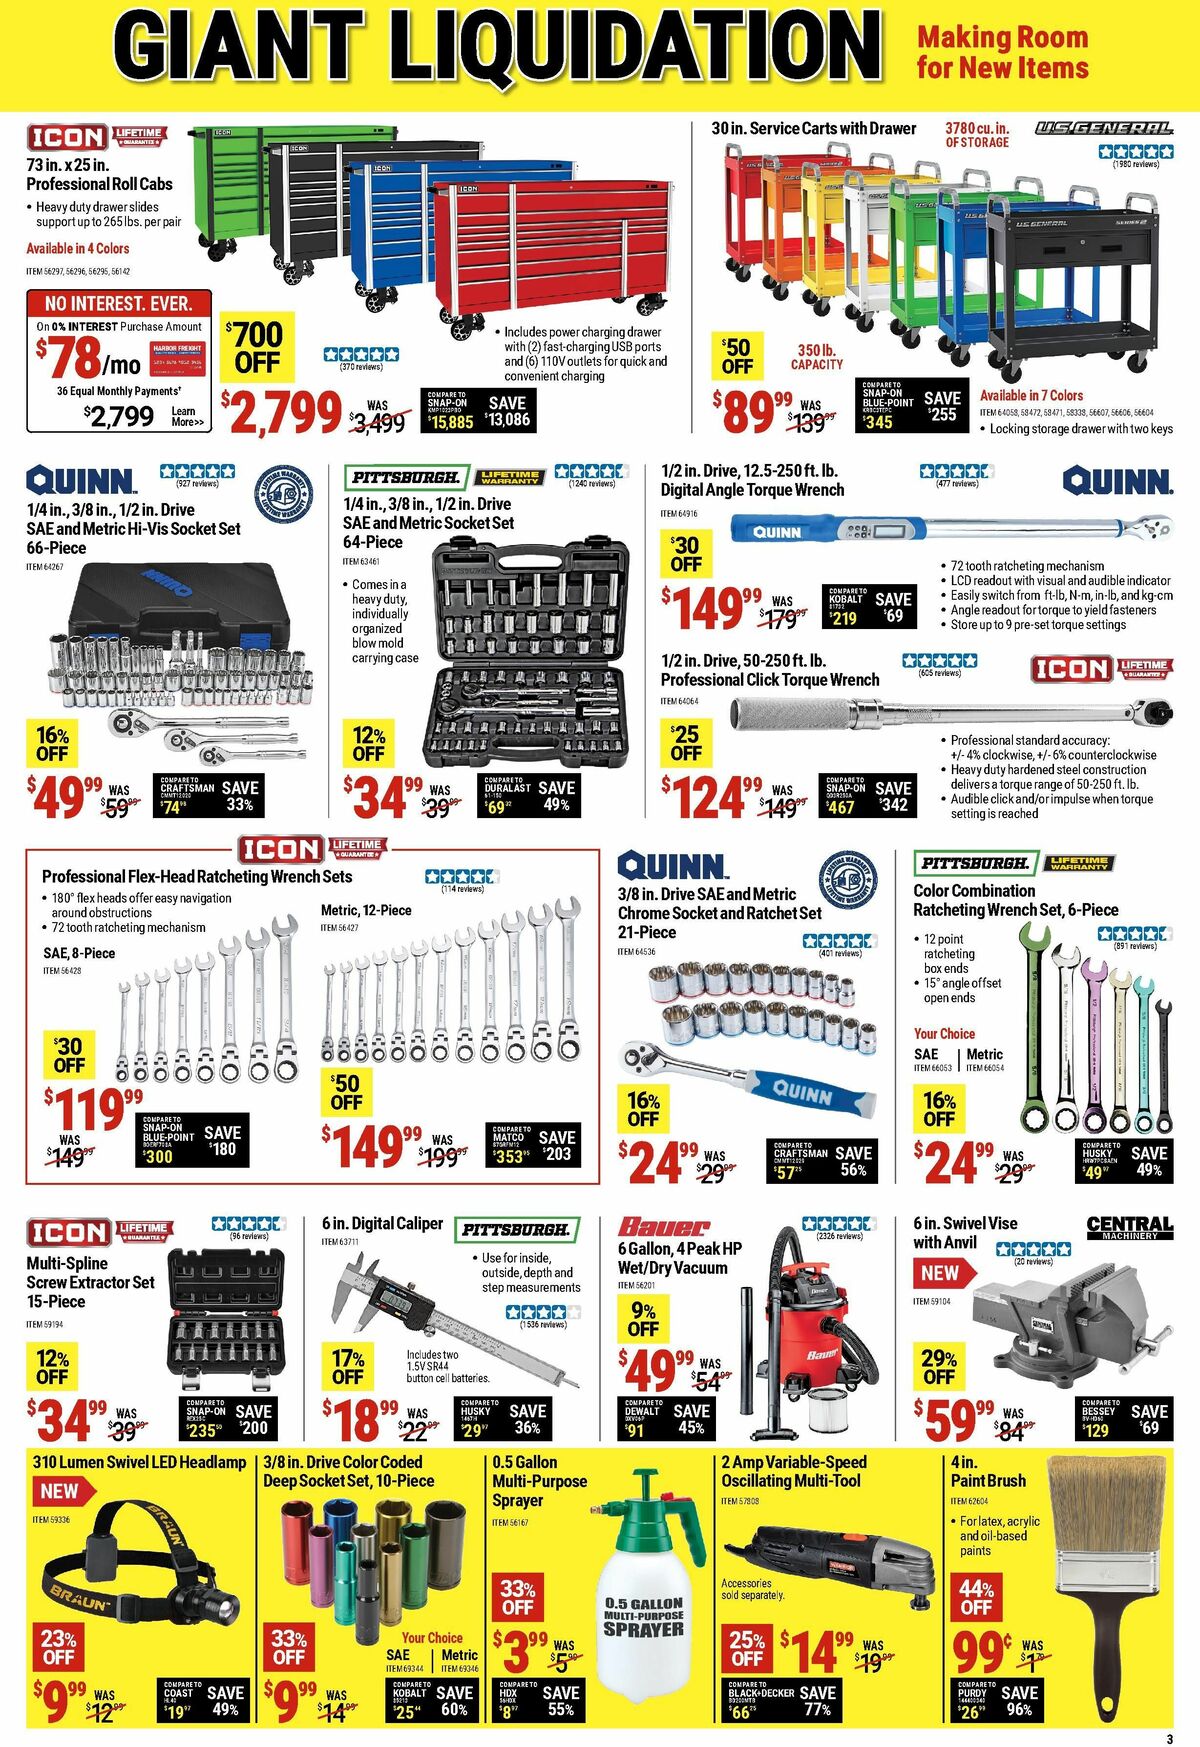 Harbor Freight Tools Weekly Ad from July 24